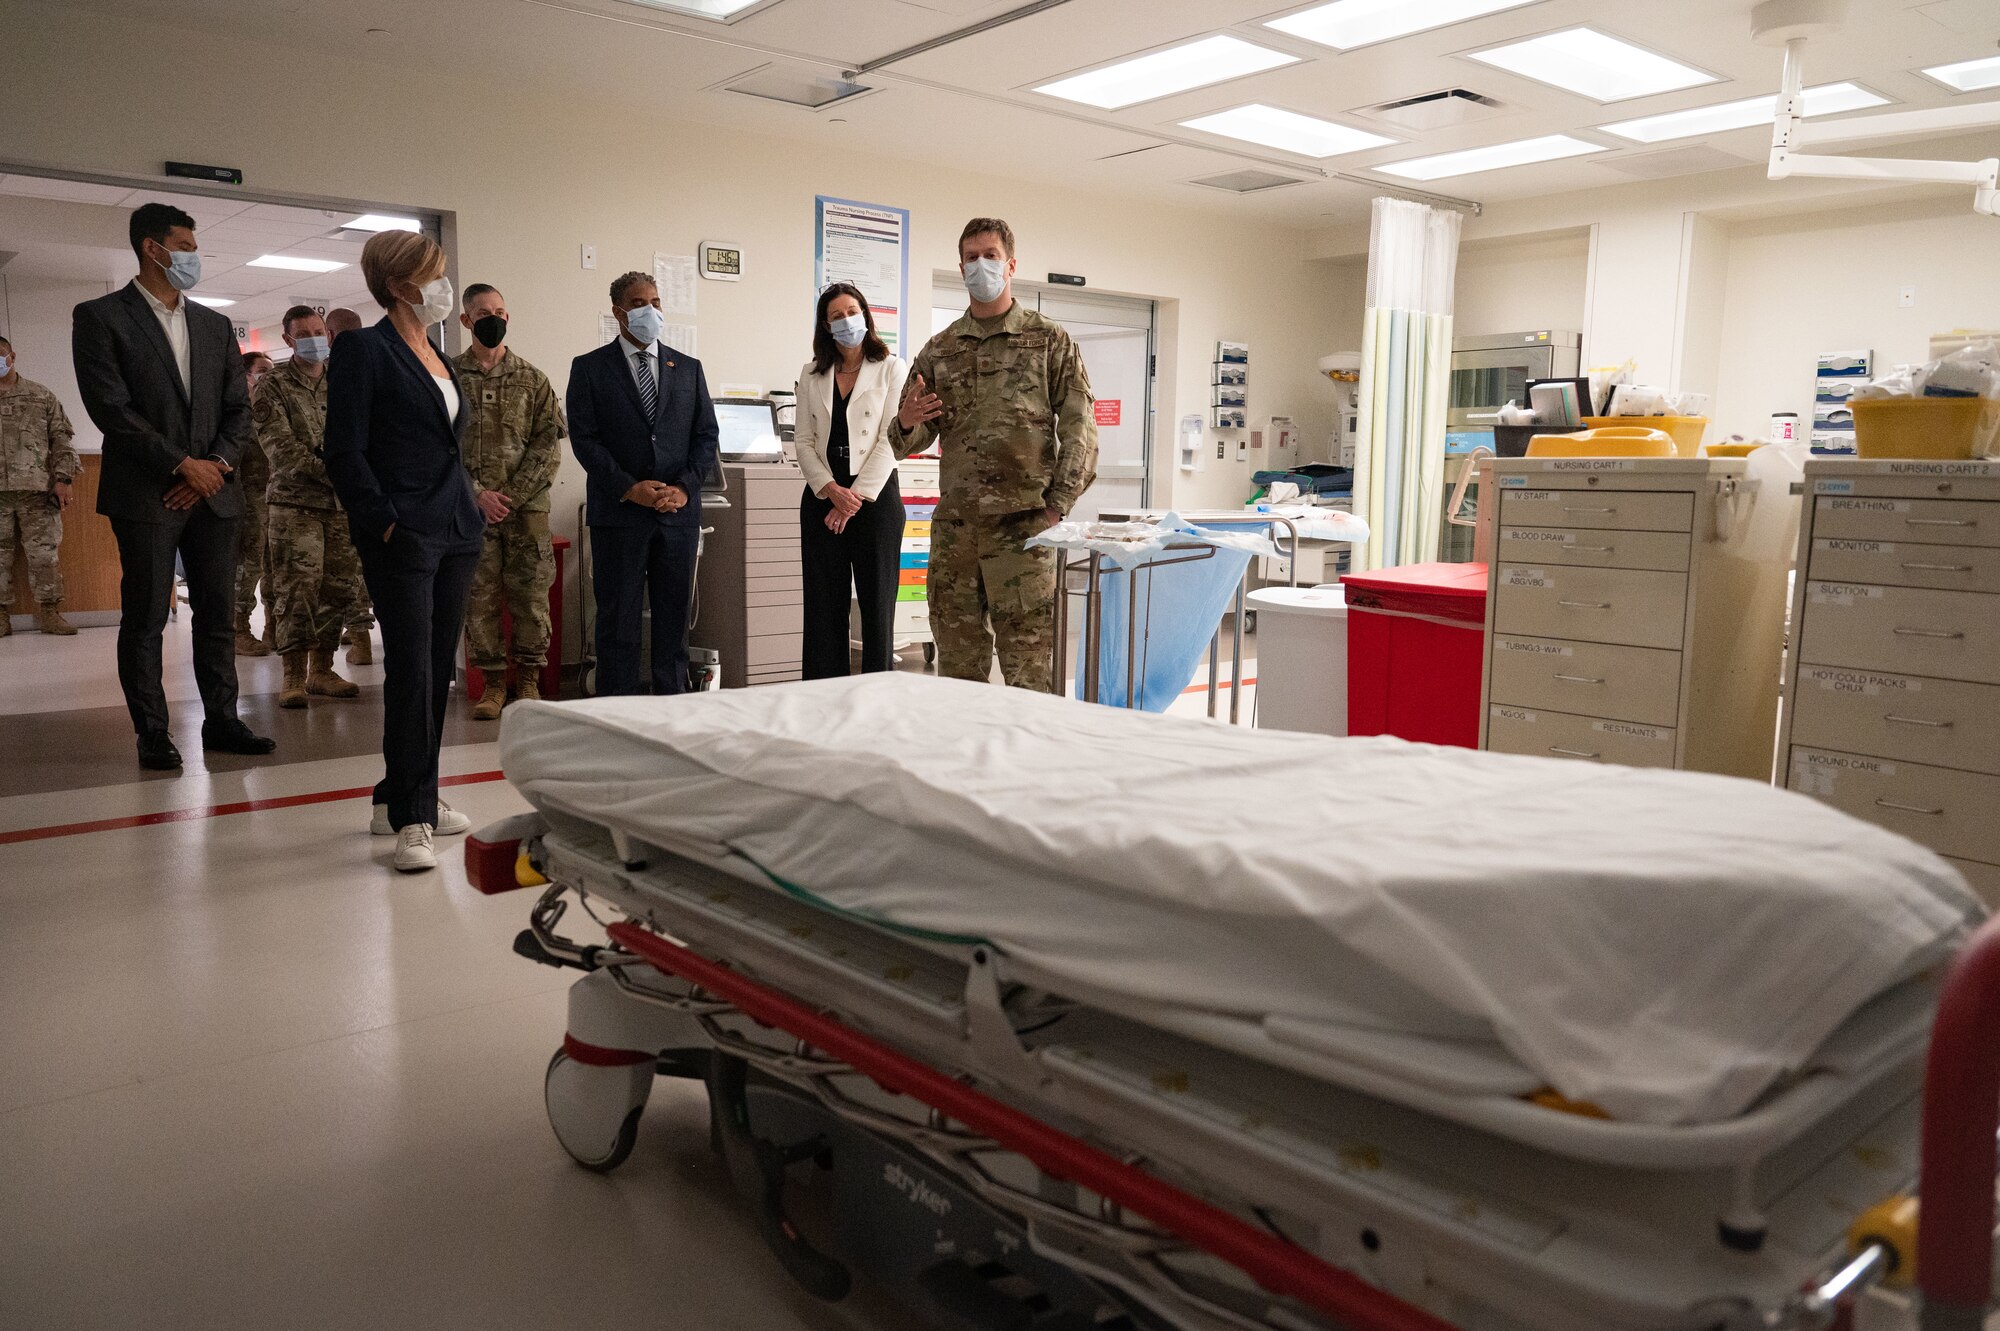 Airmen from the 99th Medical Group brief the Hon. Kristyn Jones, assistant secretary of the Air Force for Financial Management and Comptroller, performing the duties of under secretary of the Air Force and Congress members on the capabilities of the emergency department at Mike O’Callaghan Military Medical Center (MOMMC), Nellis Air Force Base, April 7, 2023.